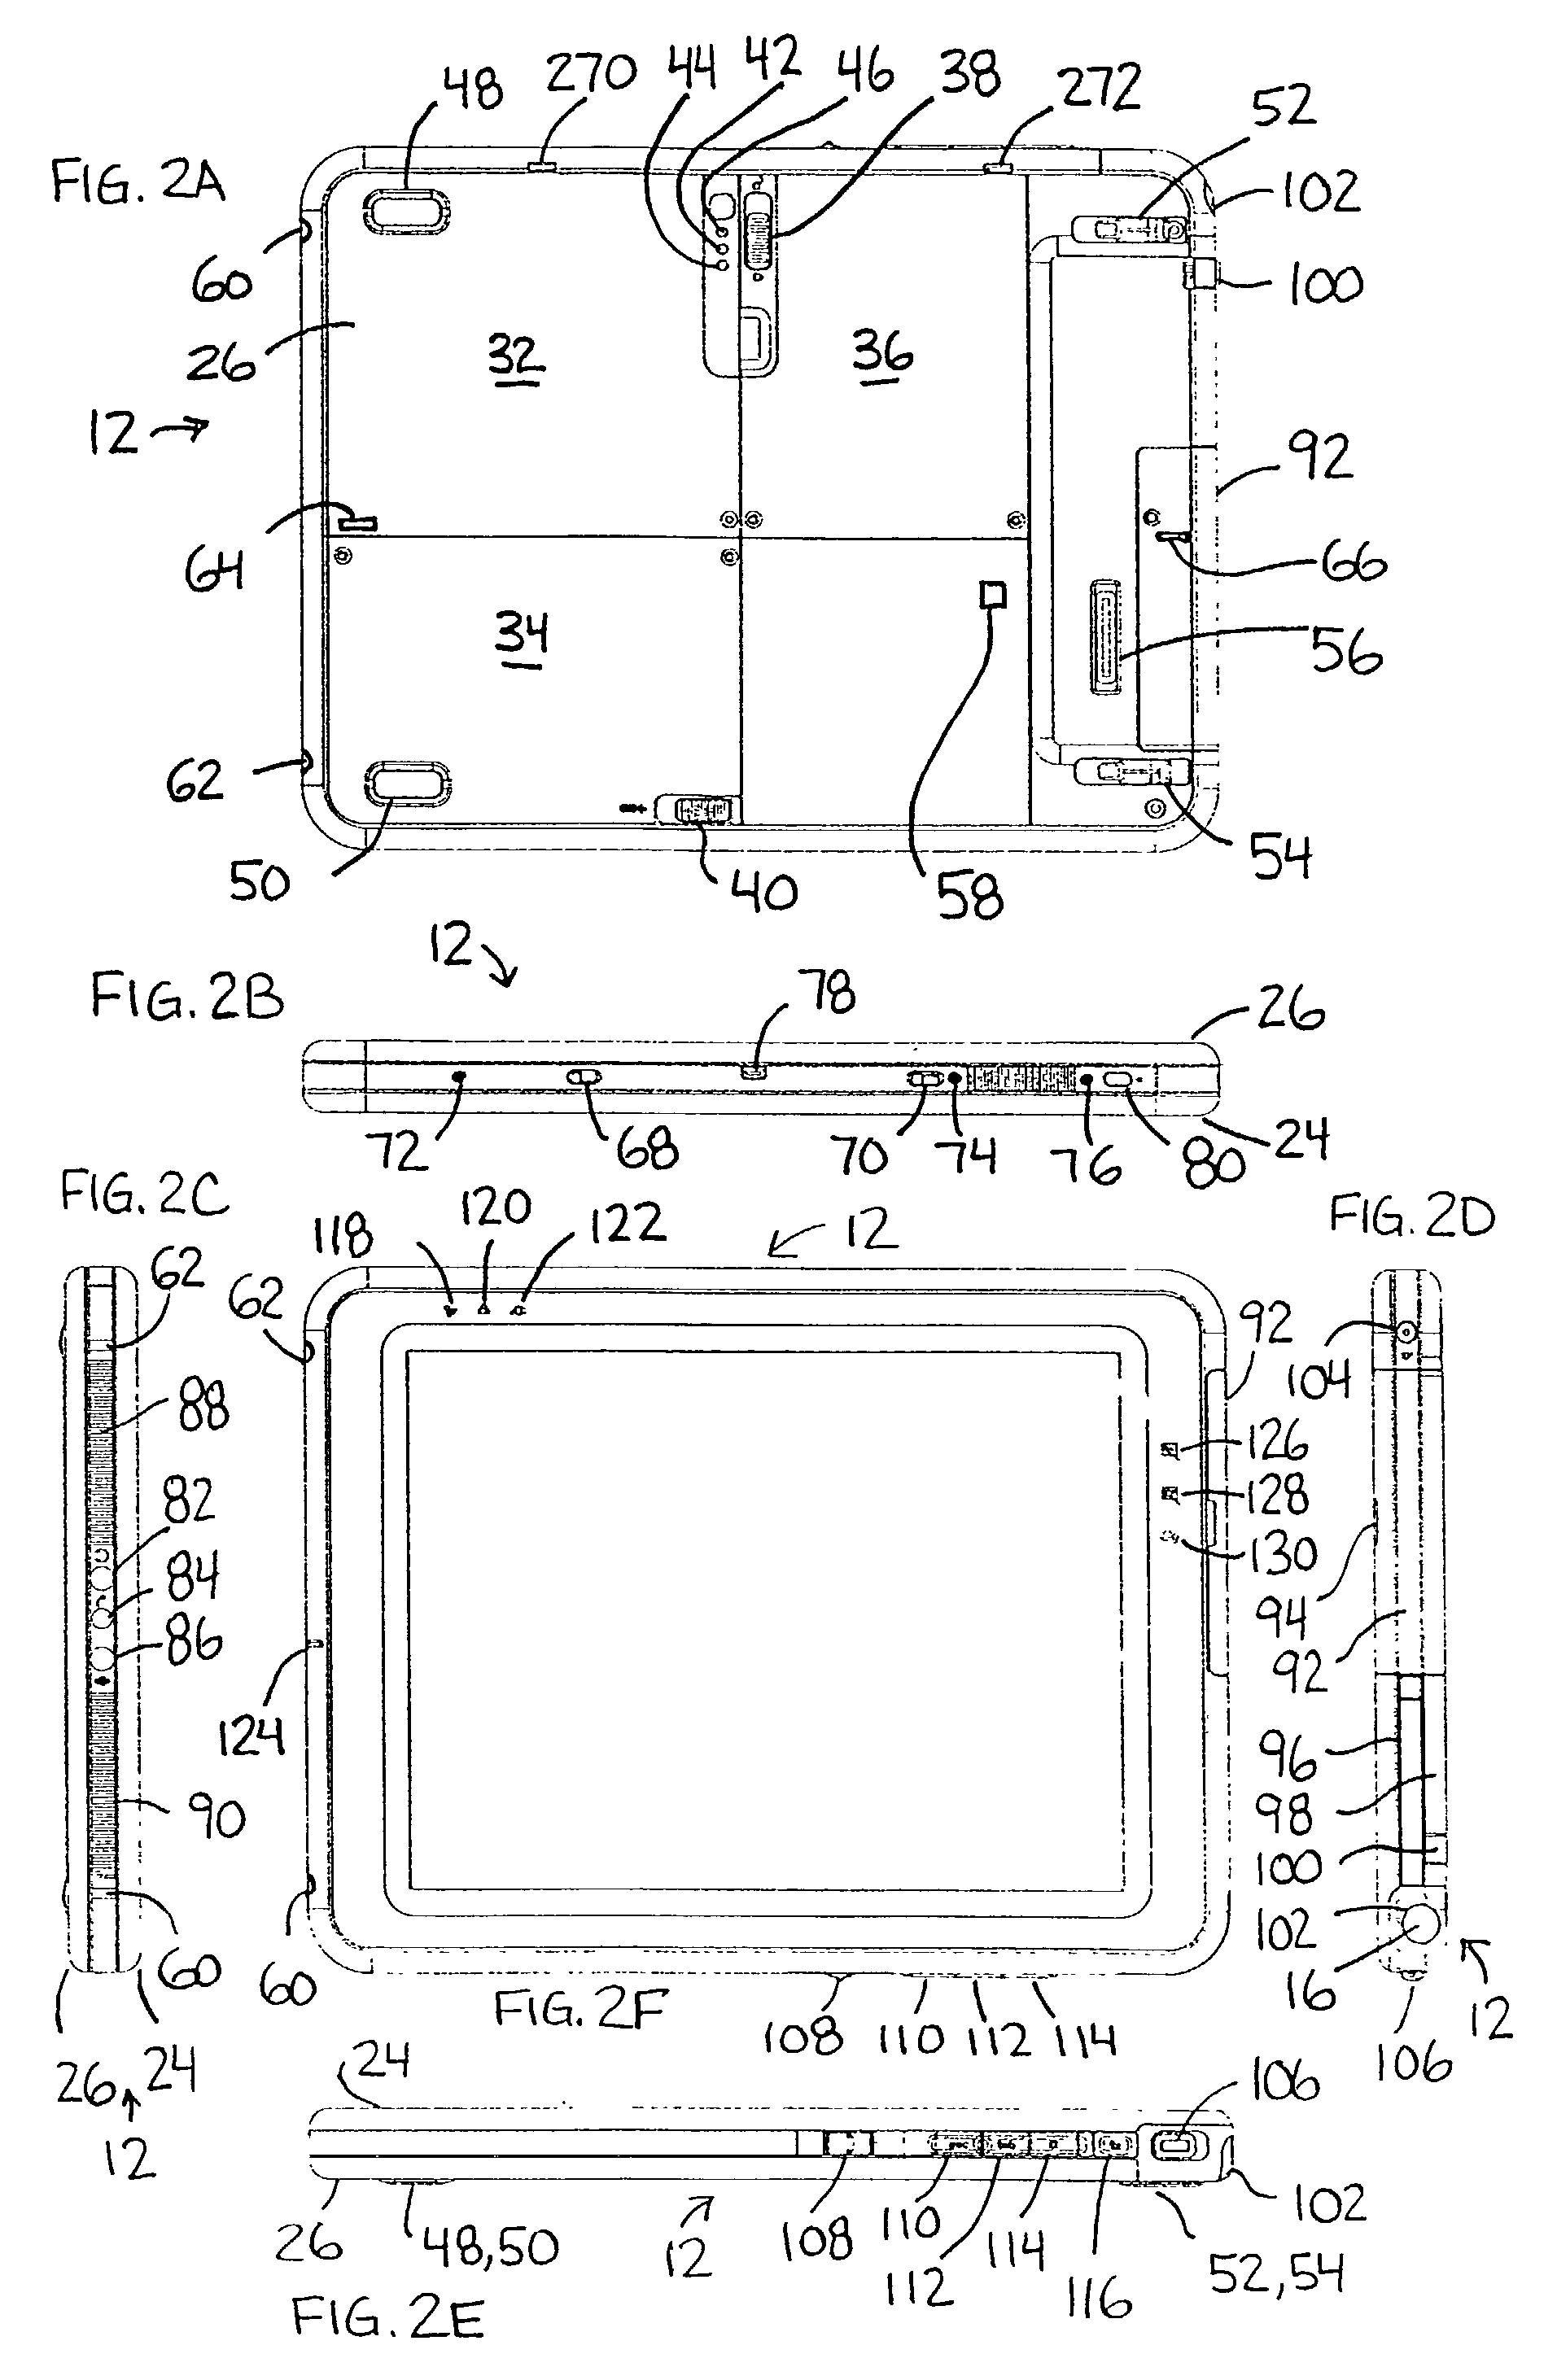 System and method of switching viewing orientations of a display